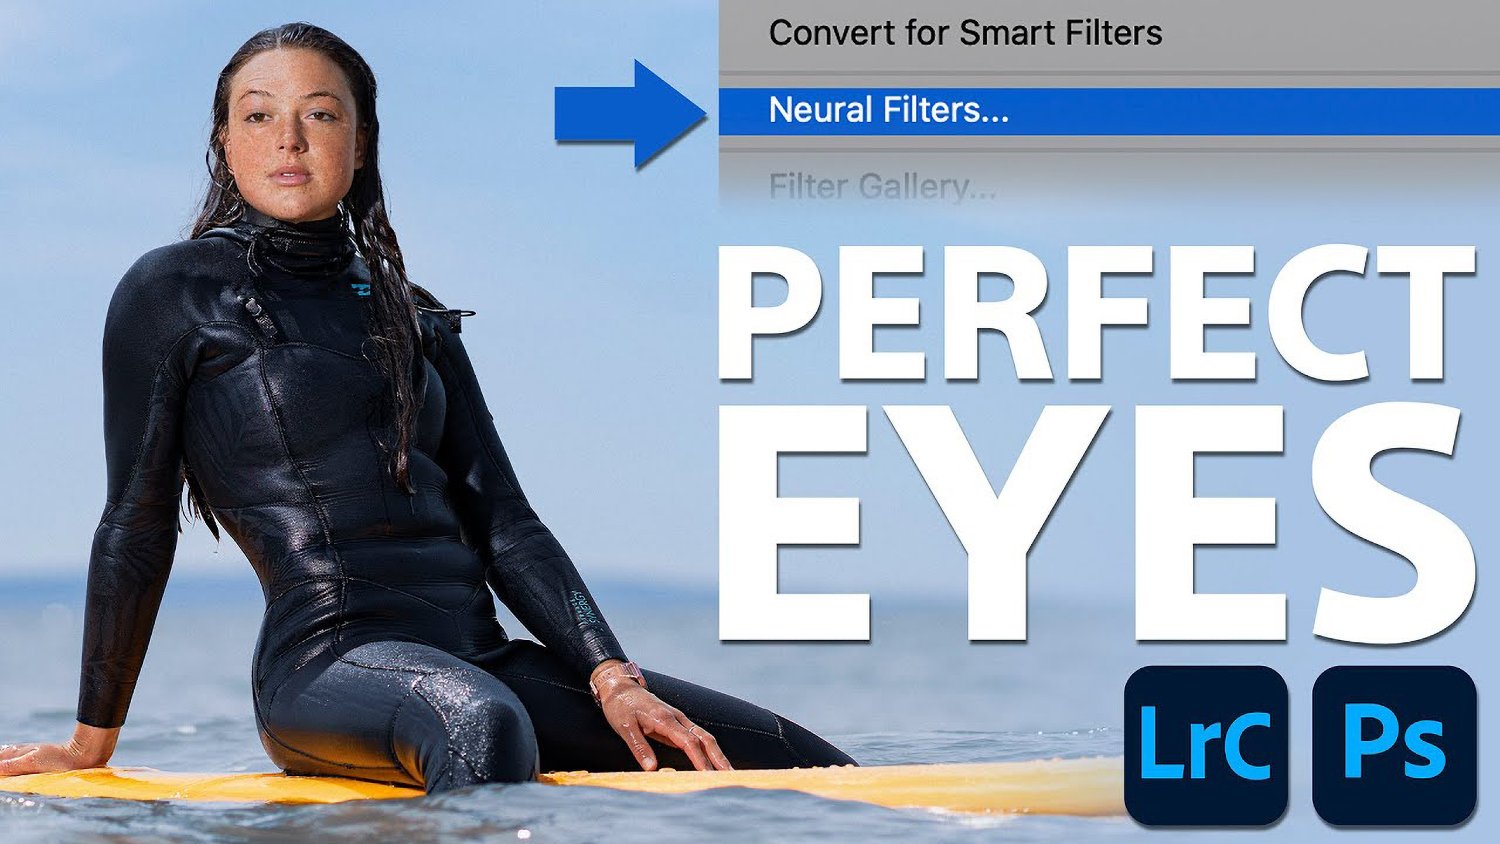 This Photoshop Tool Will Create Perfect Eyes in Portraits